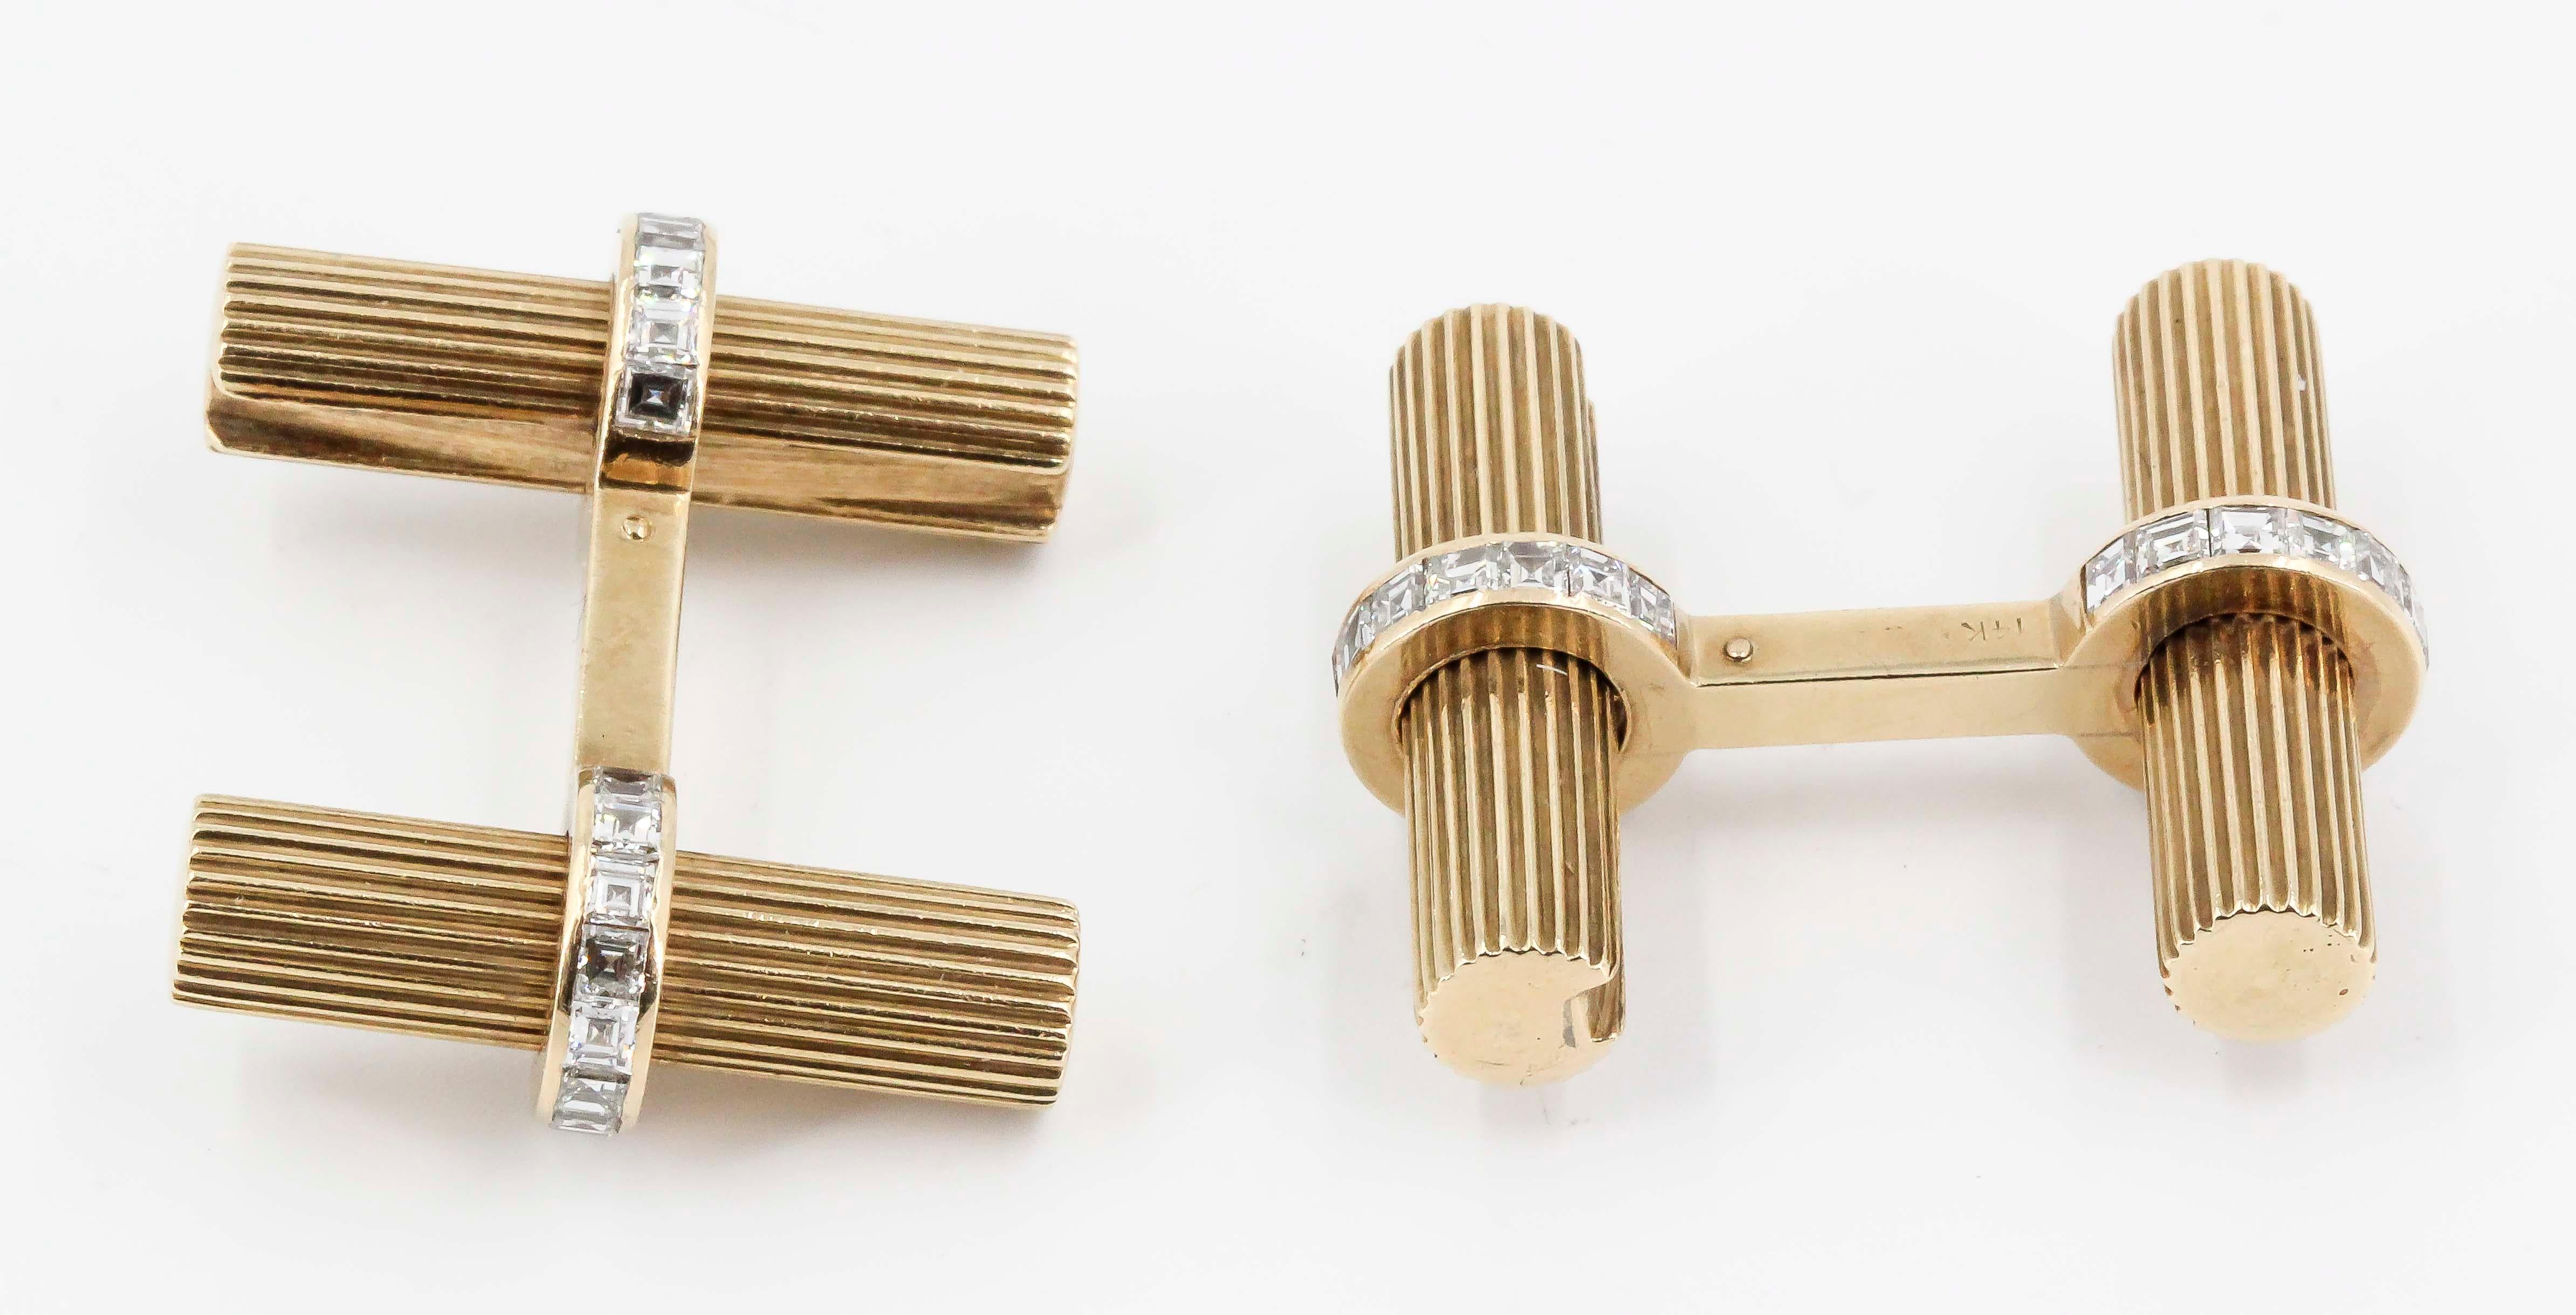 Handsome 14K yellow gold and diamond bar cufflinks and tie bar set by Cartier, circa 1950s. They feature high grade square cut diamonds, approx. 1.50 cts total weight. Cufflinks are 1